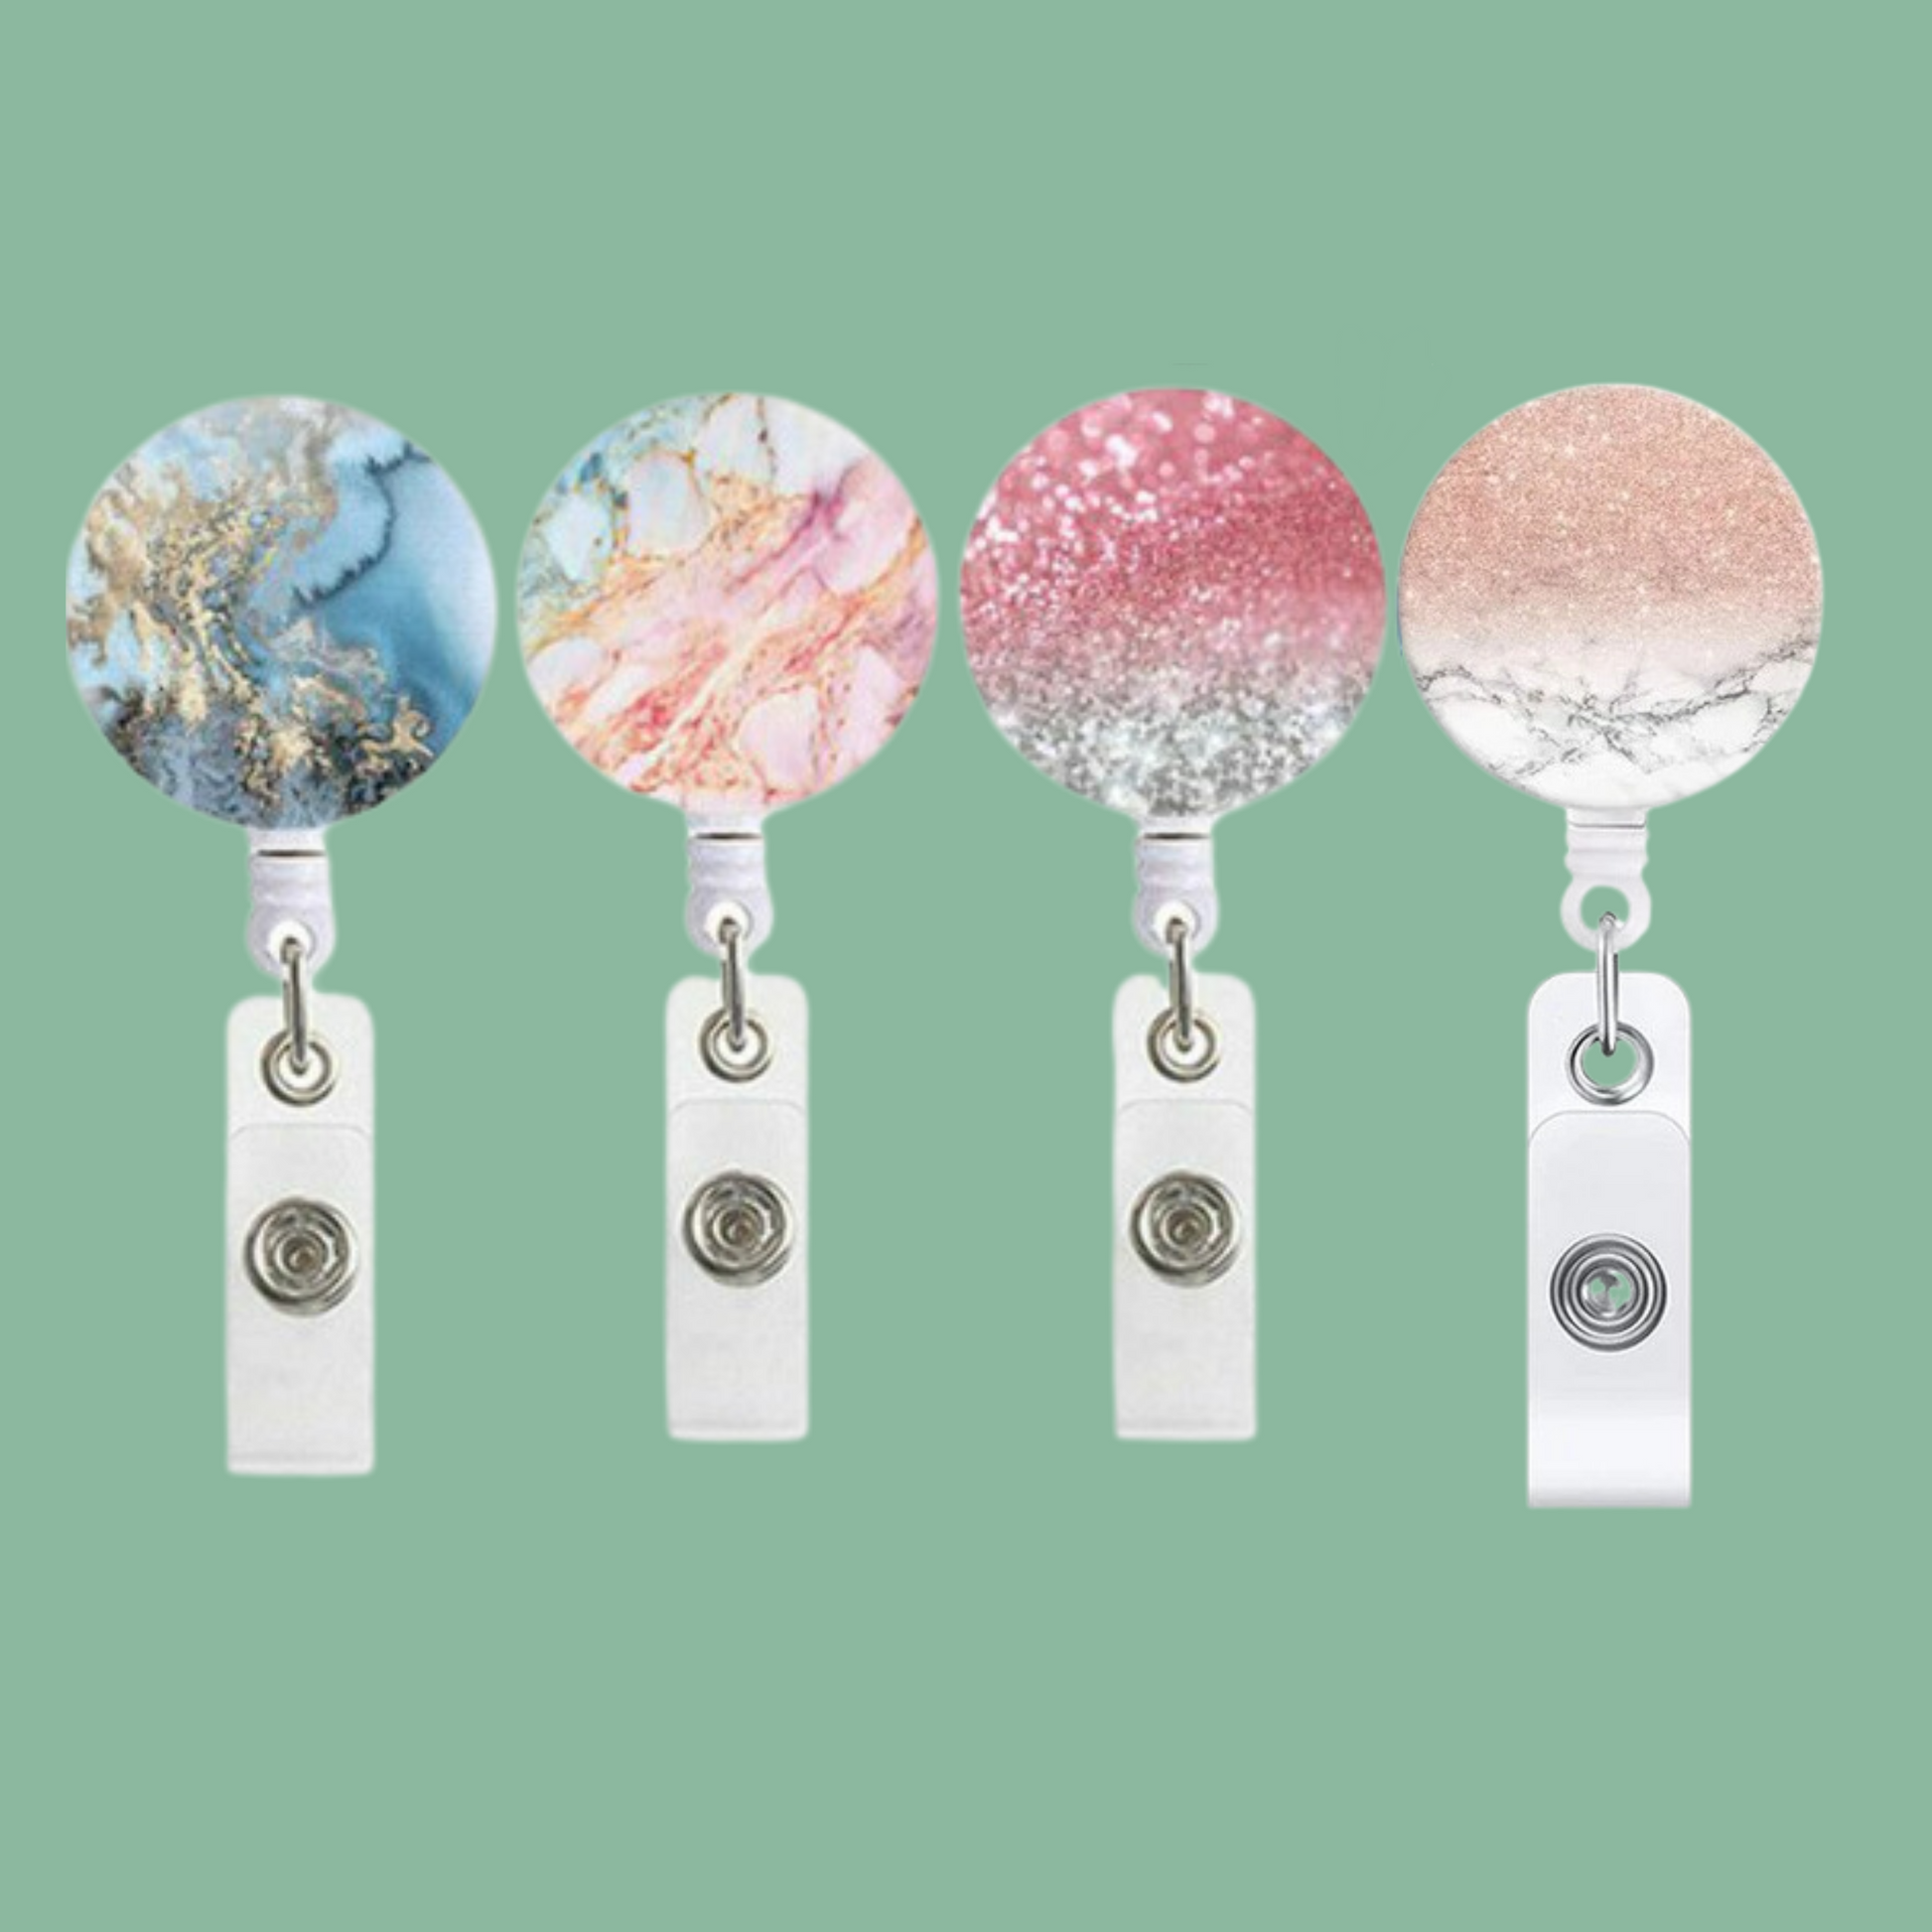 Marble Retractable Badge Reel for Name Badge Holders or Id cards - PeppaTree Design Store